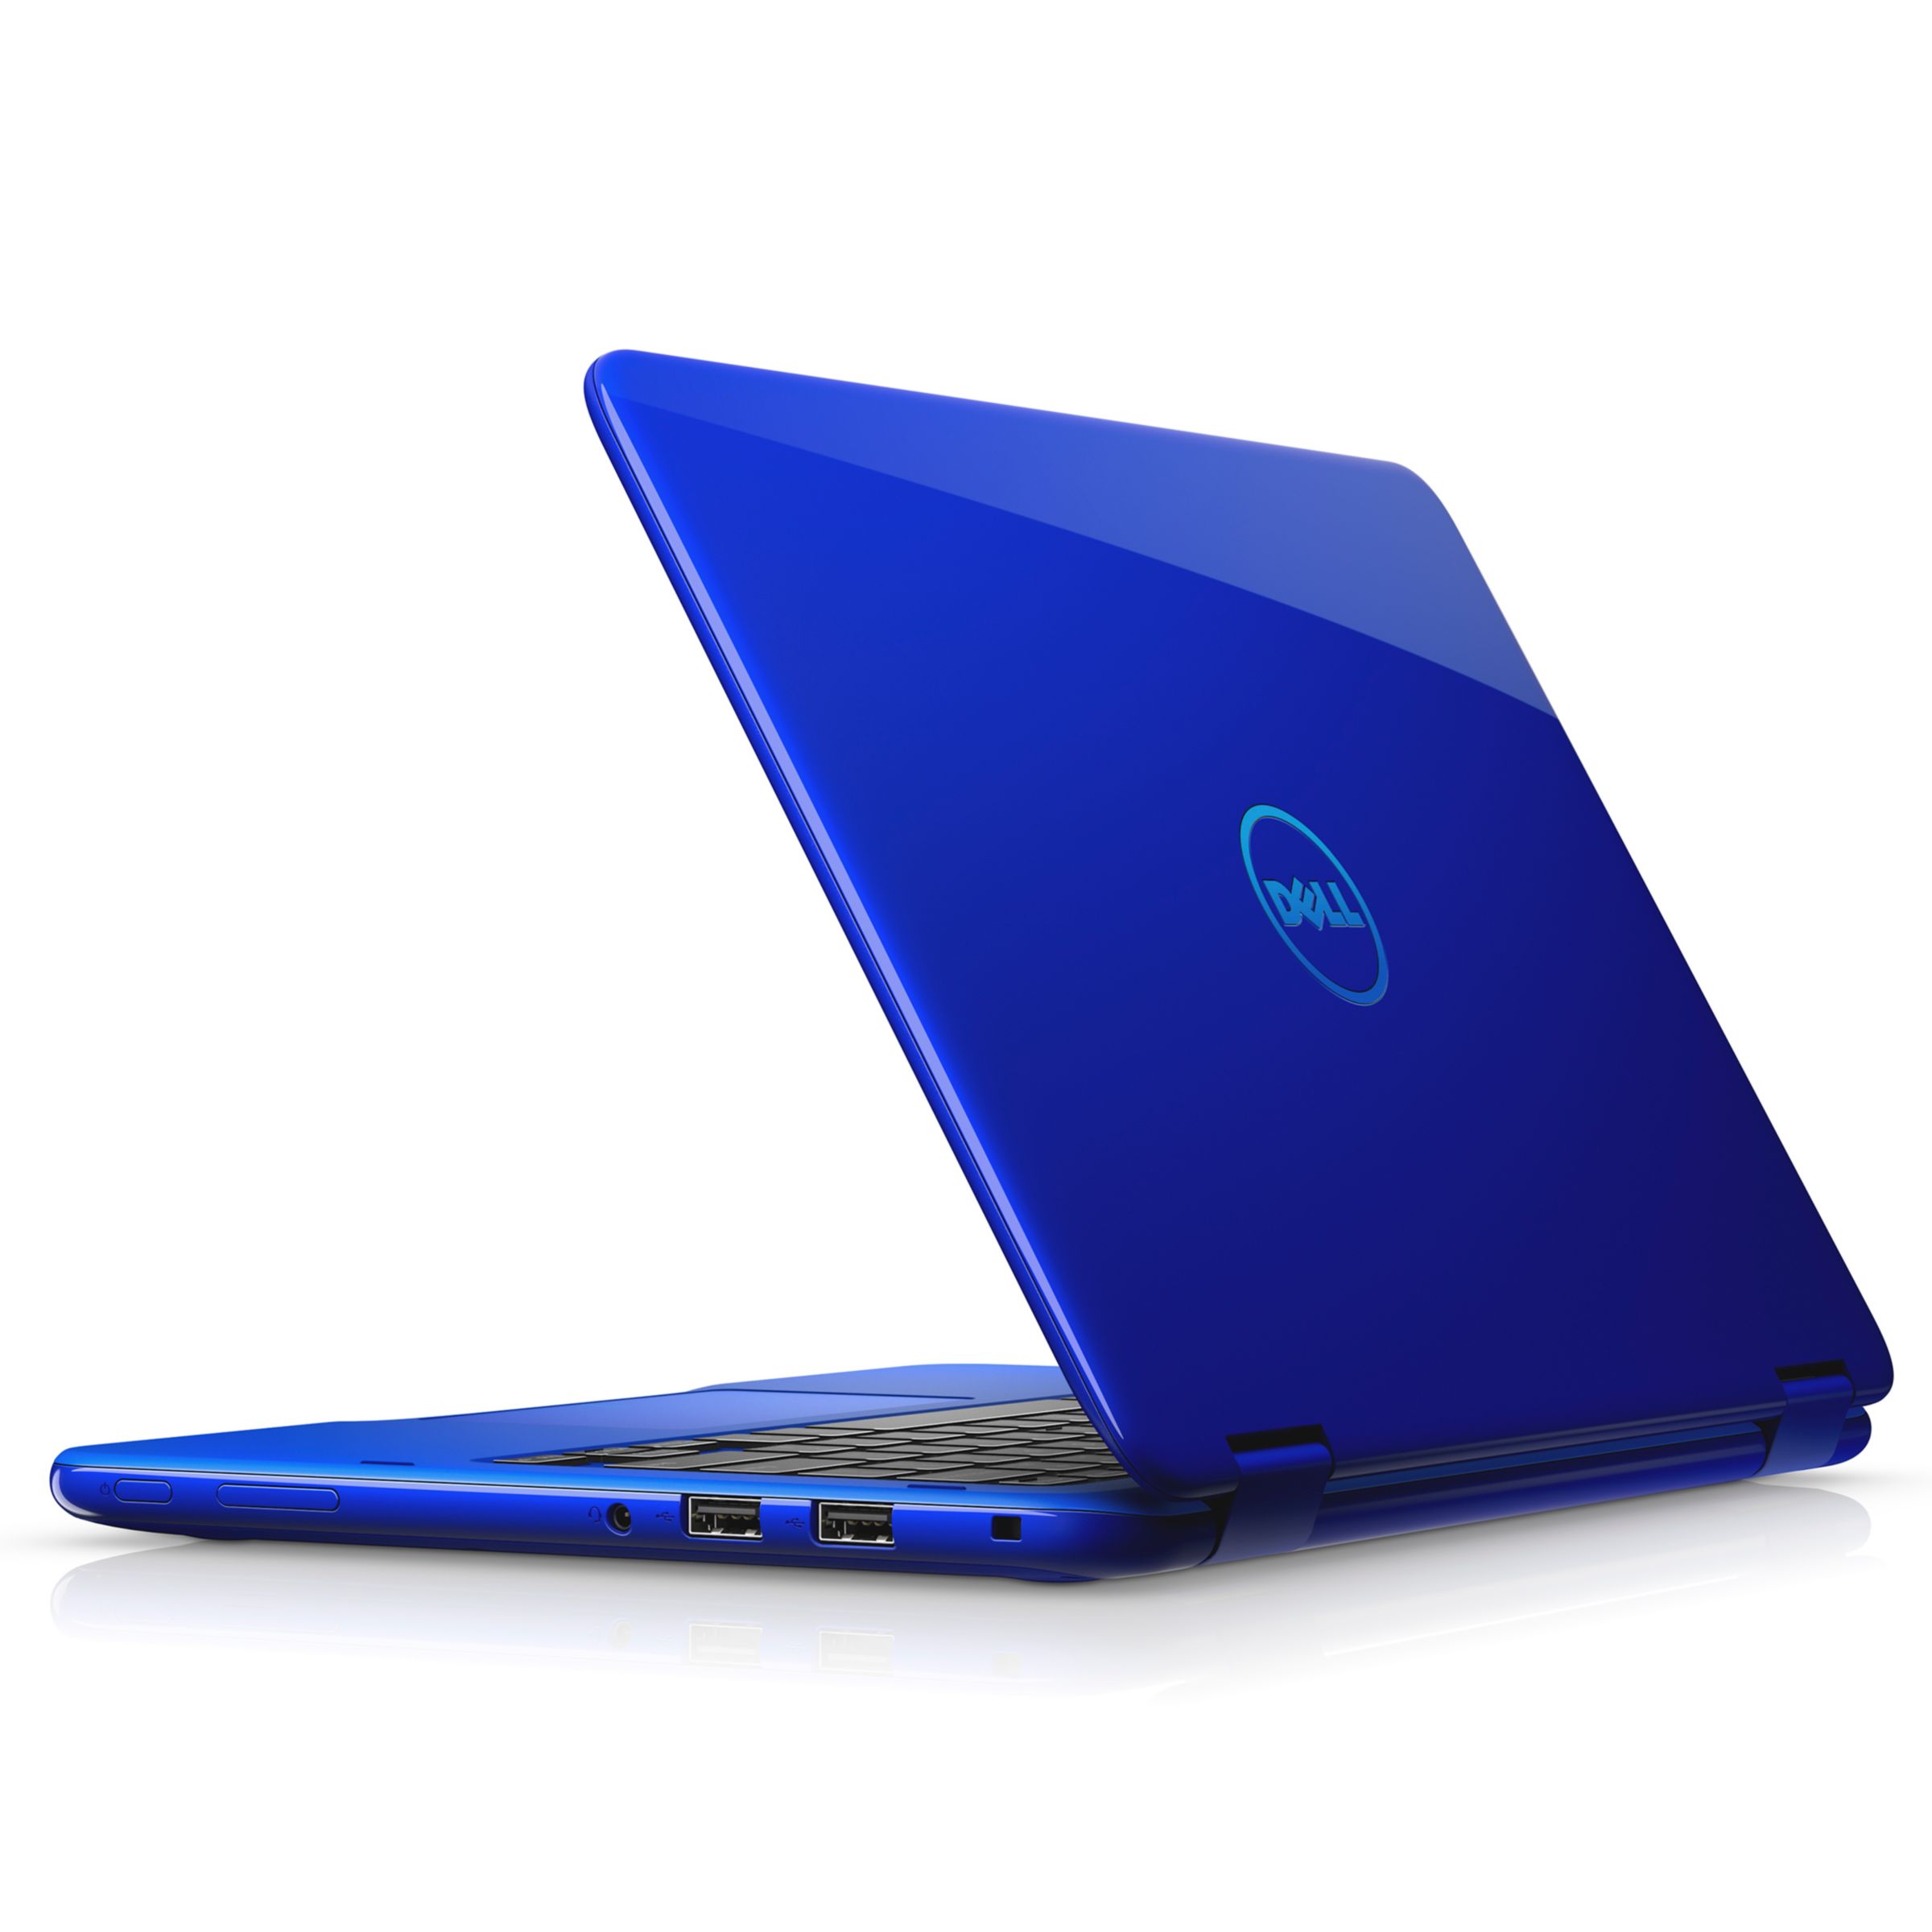 Dell Inspiron 11 3000 Series 2 In 1 Laptop Intel Core M3 4gb Ram 500gb 11 6 At John Lewis Partners